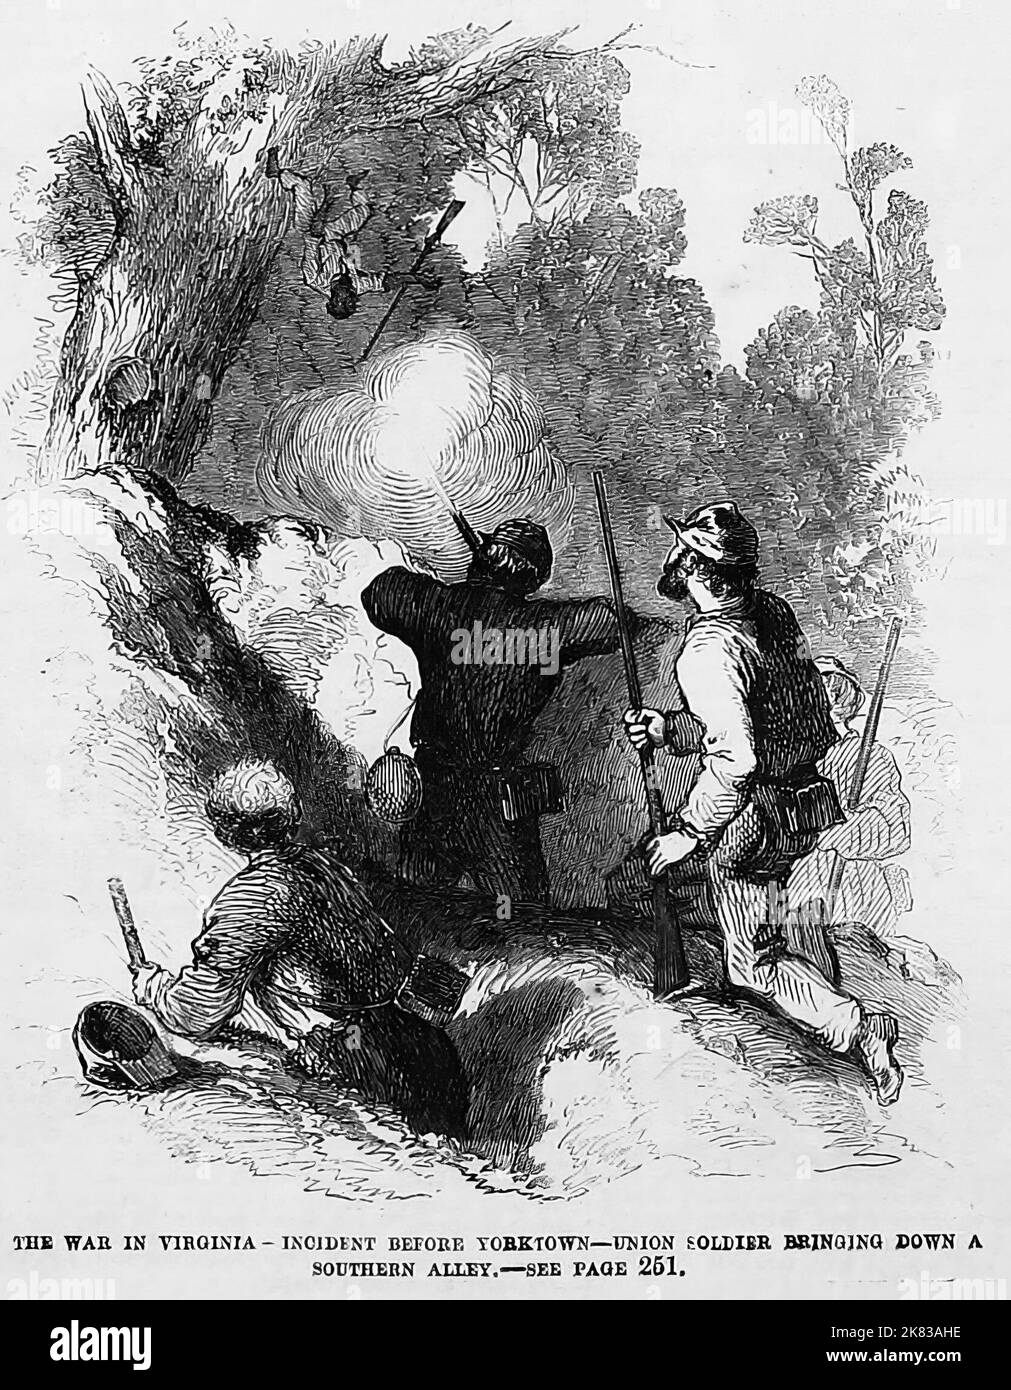 The War in Virginia - Incident before Yorktown - Union soldier bringing down a Southern ally. 1862. 19th century American Civil War illustration from Frank Leslie's Illustrated Newspaper Stock Photo